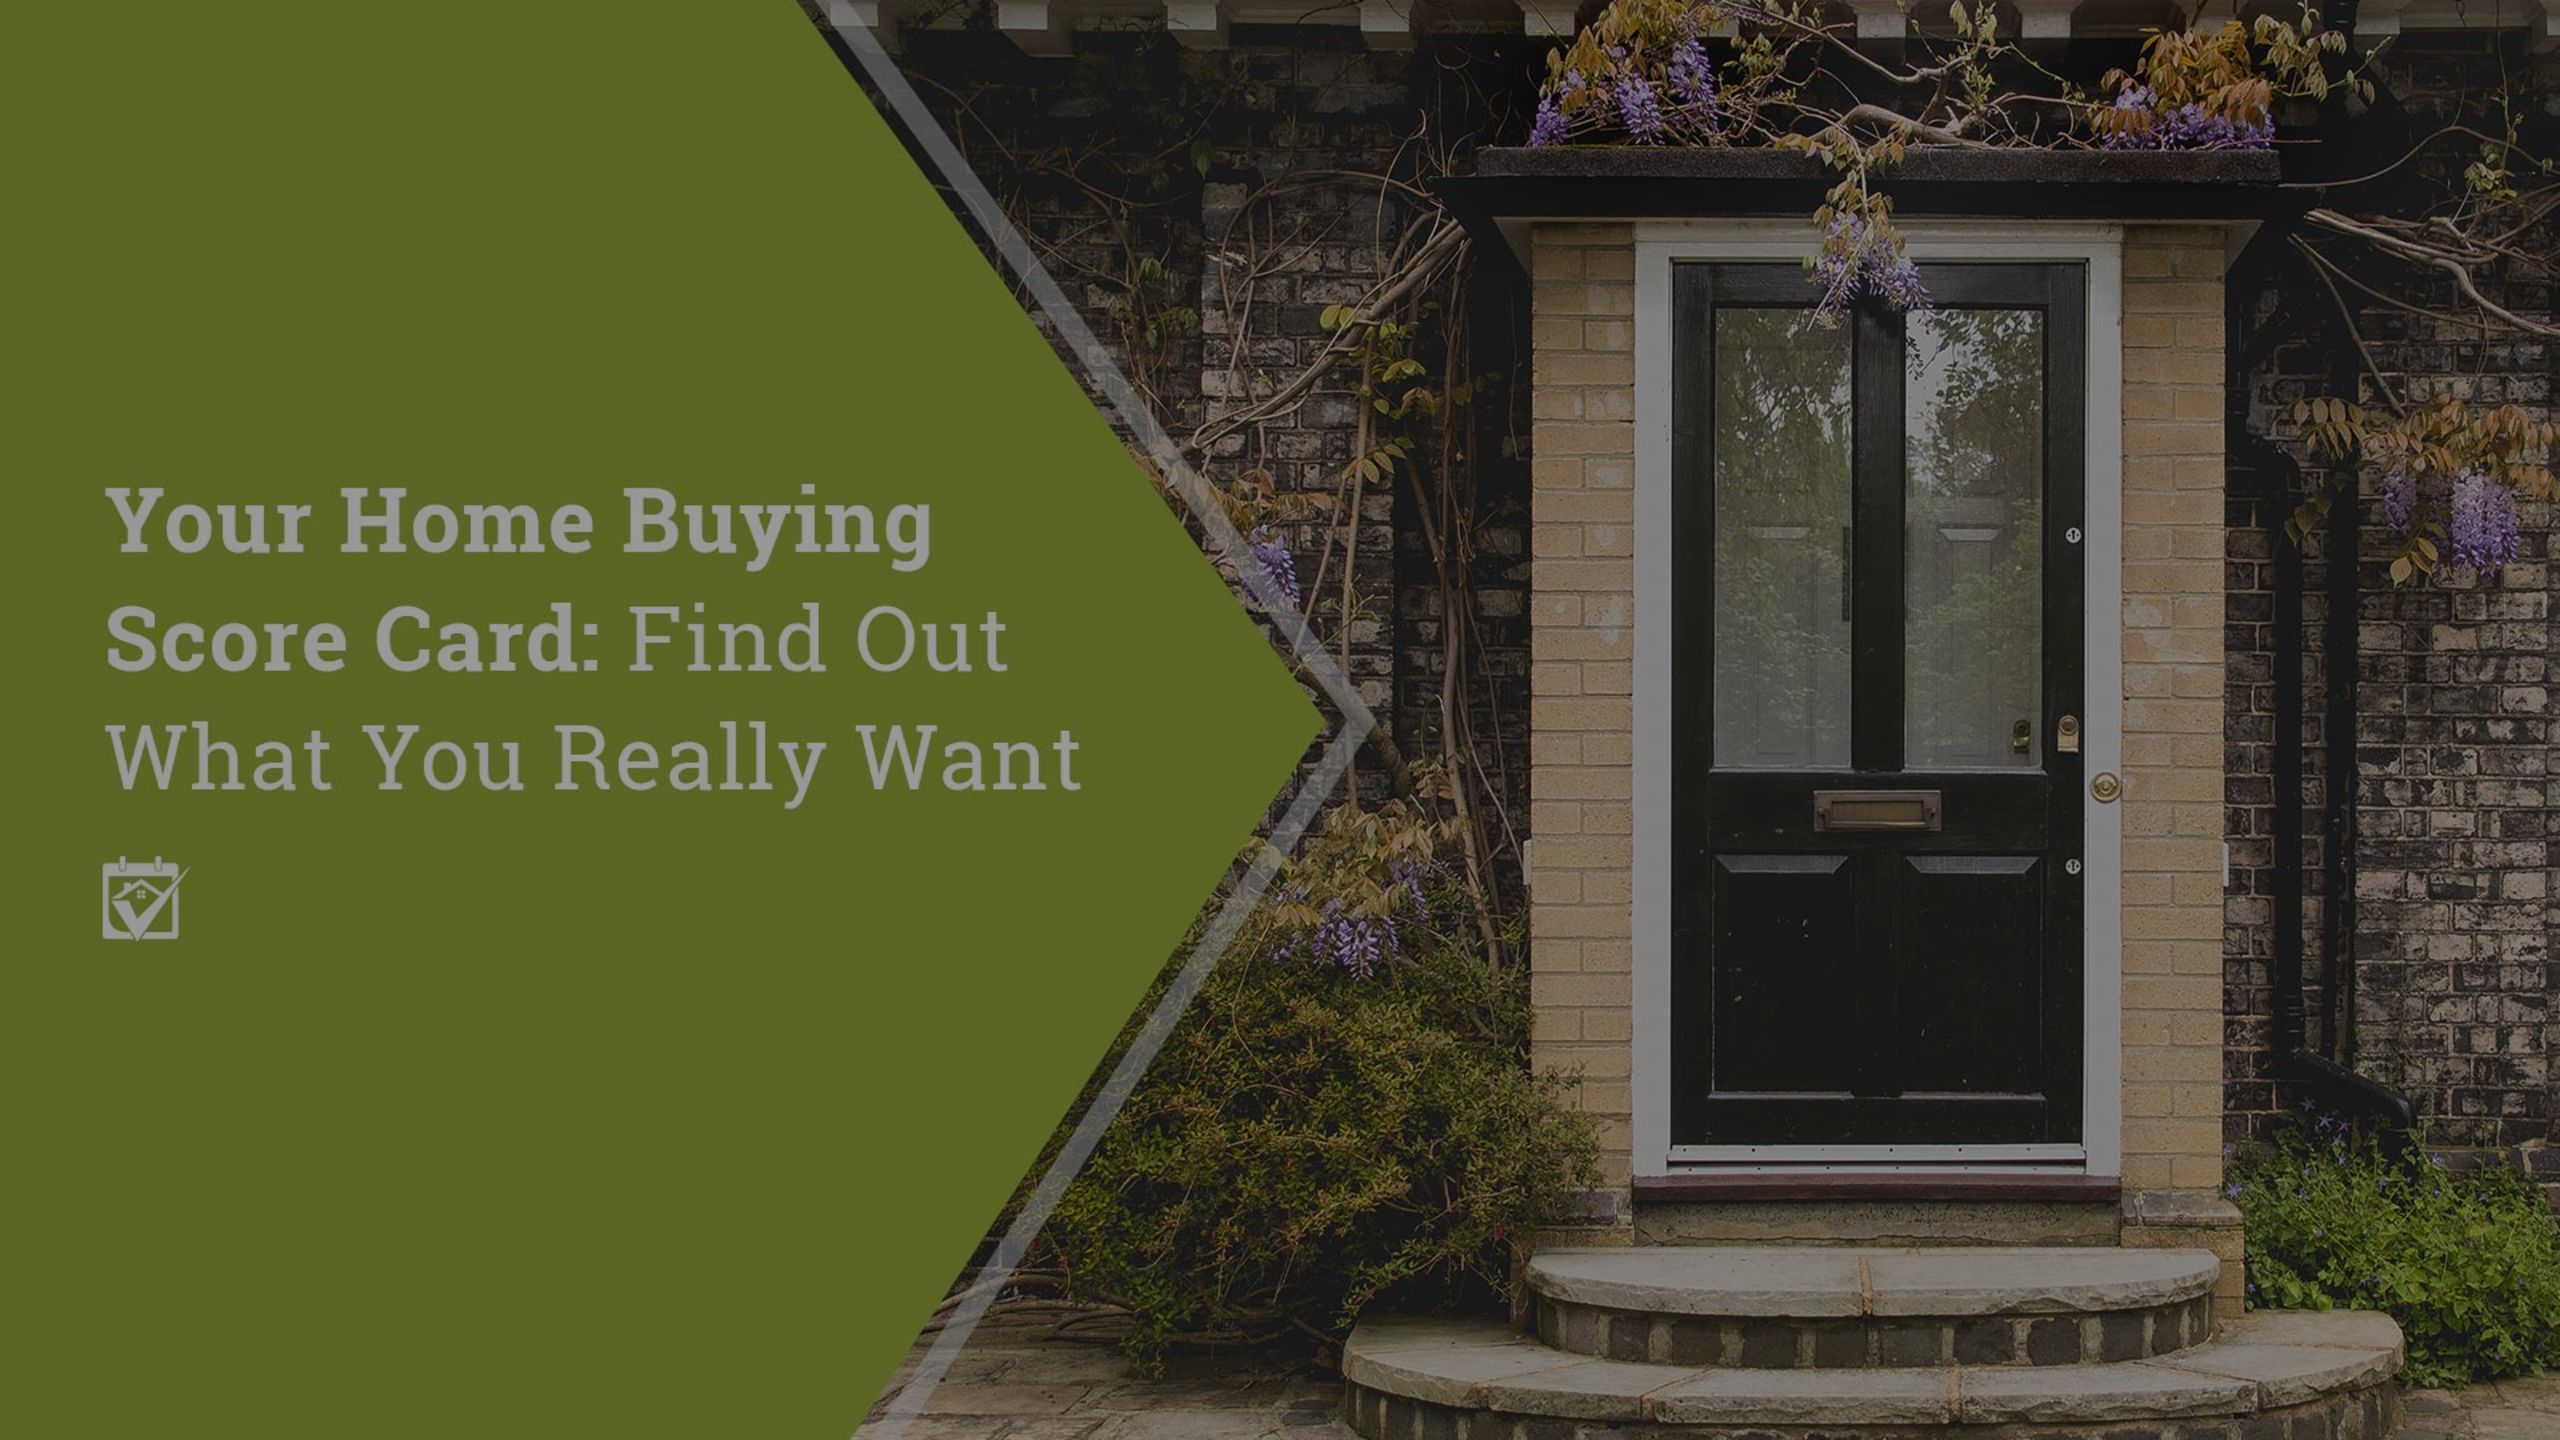 Your Home Buying Score Card: Find Out What You Really Want